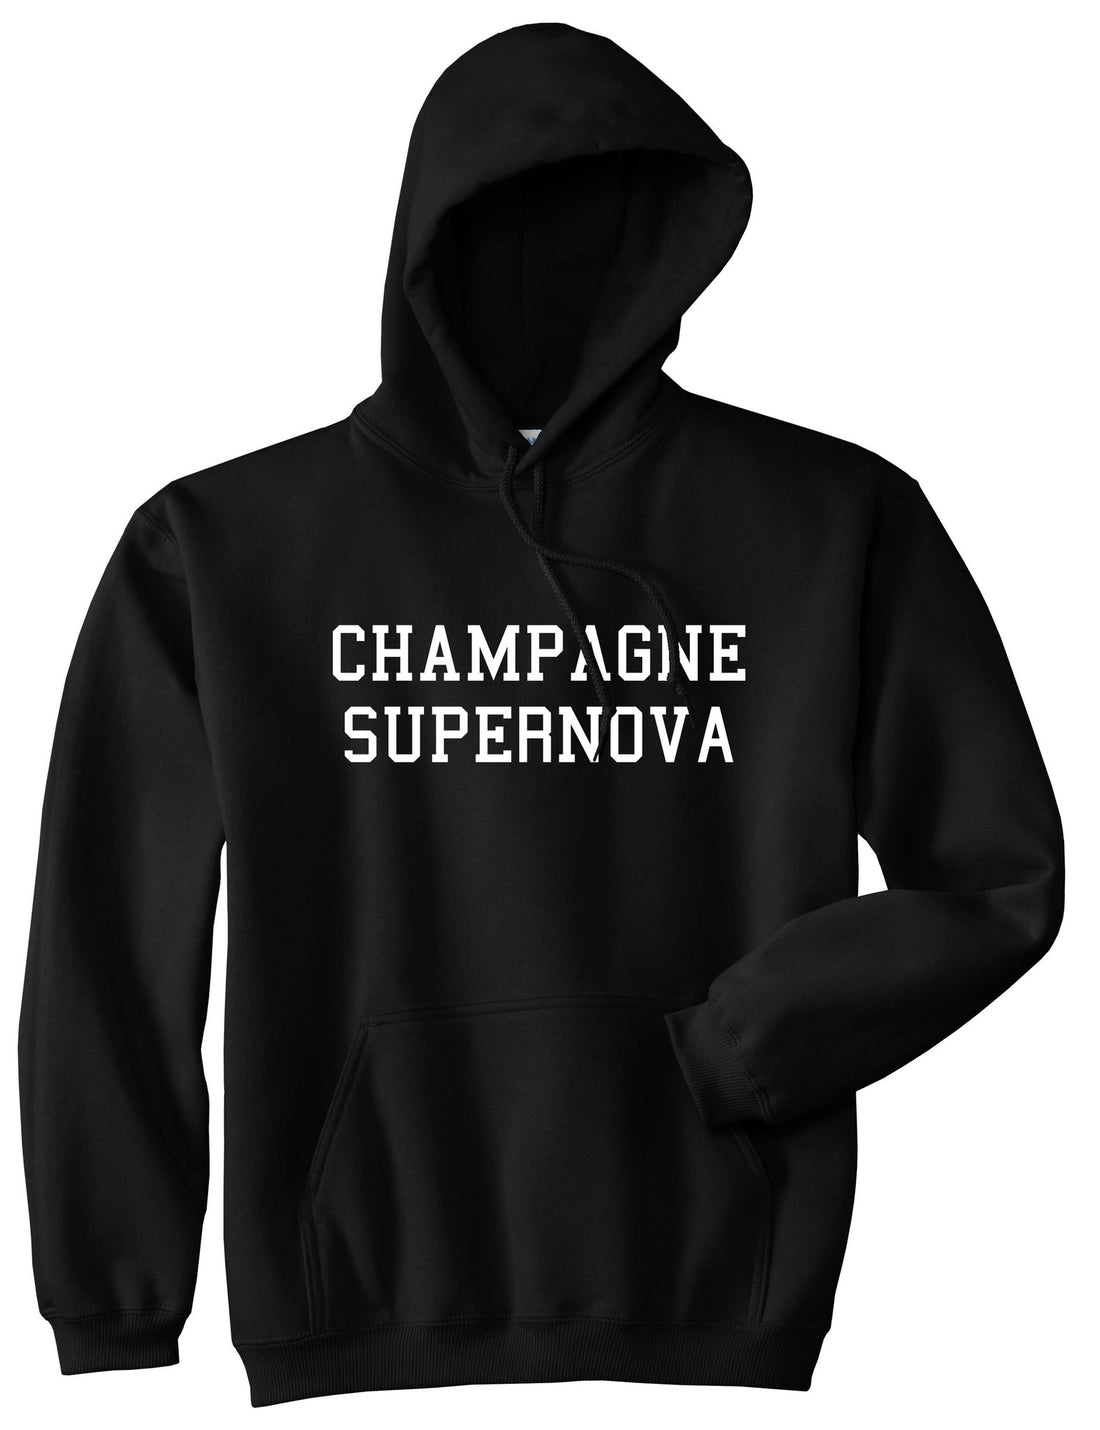 Champagne Supernova Pullover Hoodie Hoody in Black by Kings Of NY